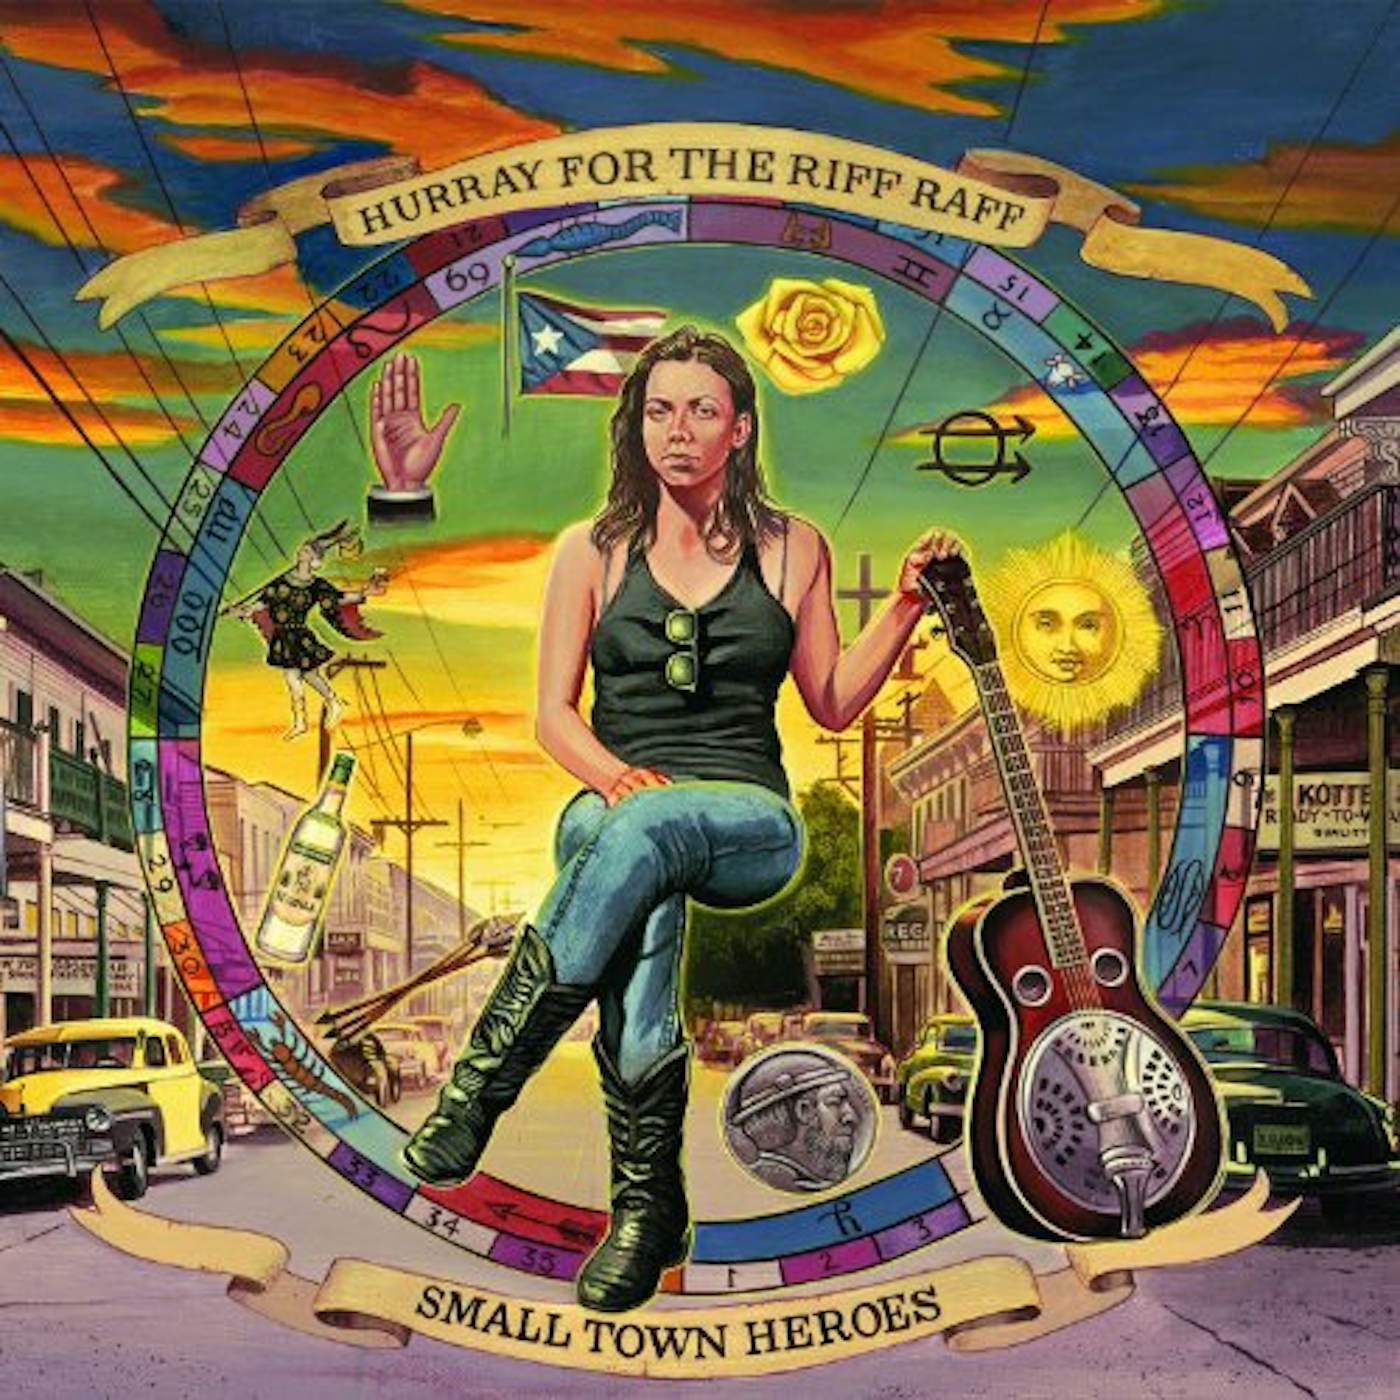 Hurray For The Riff Raff Small Town Heroes Vinyl Record